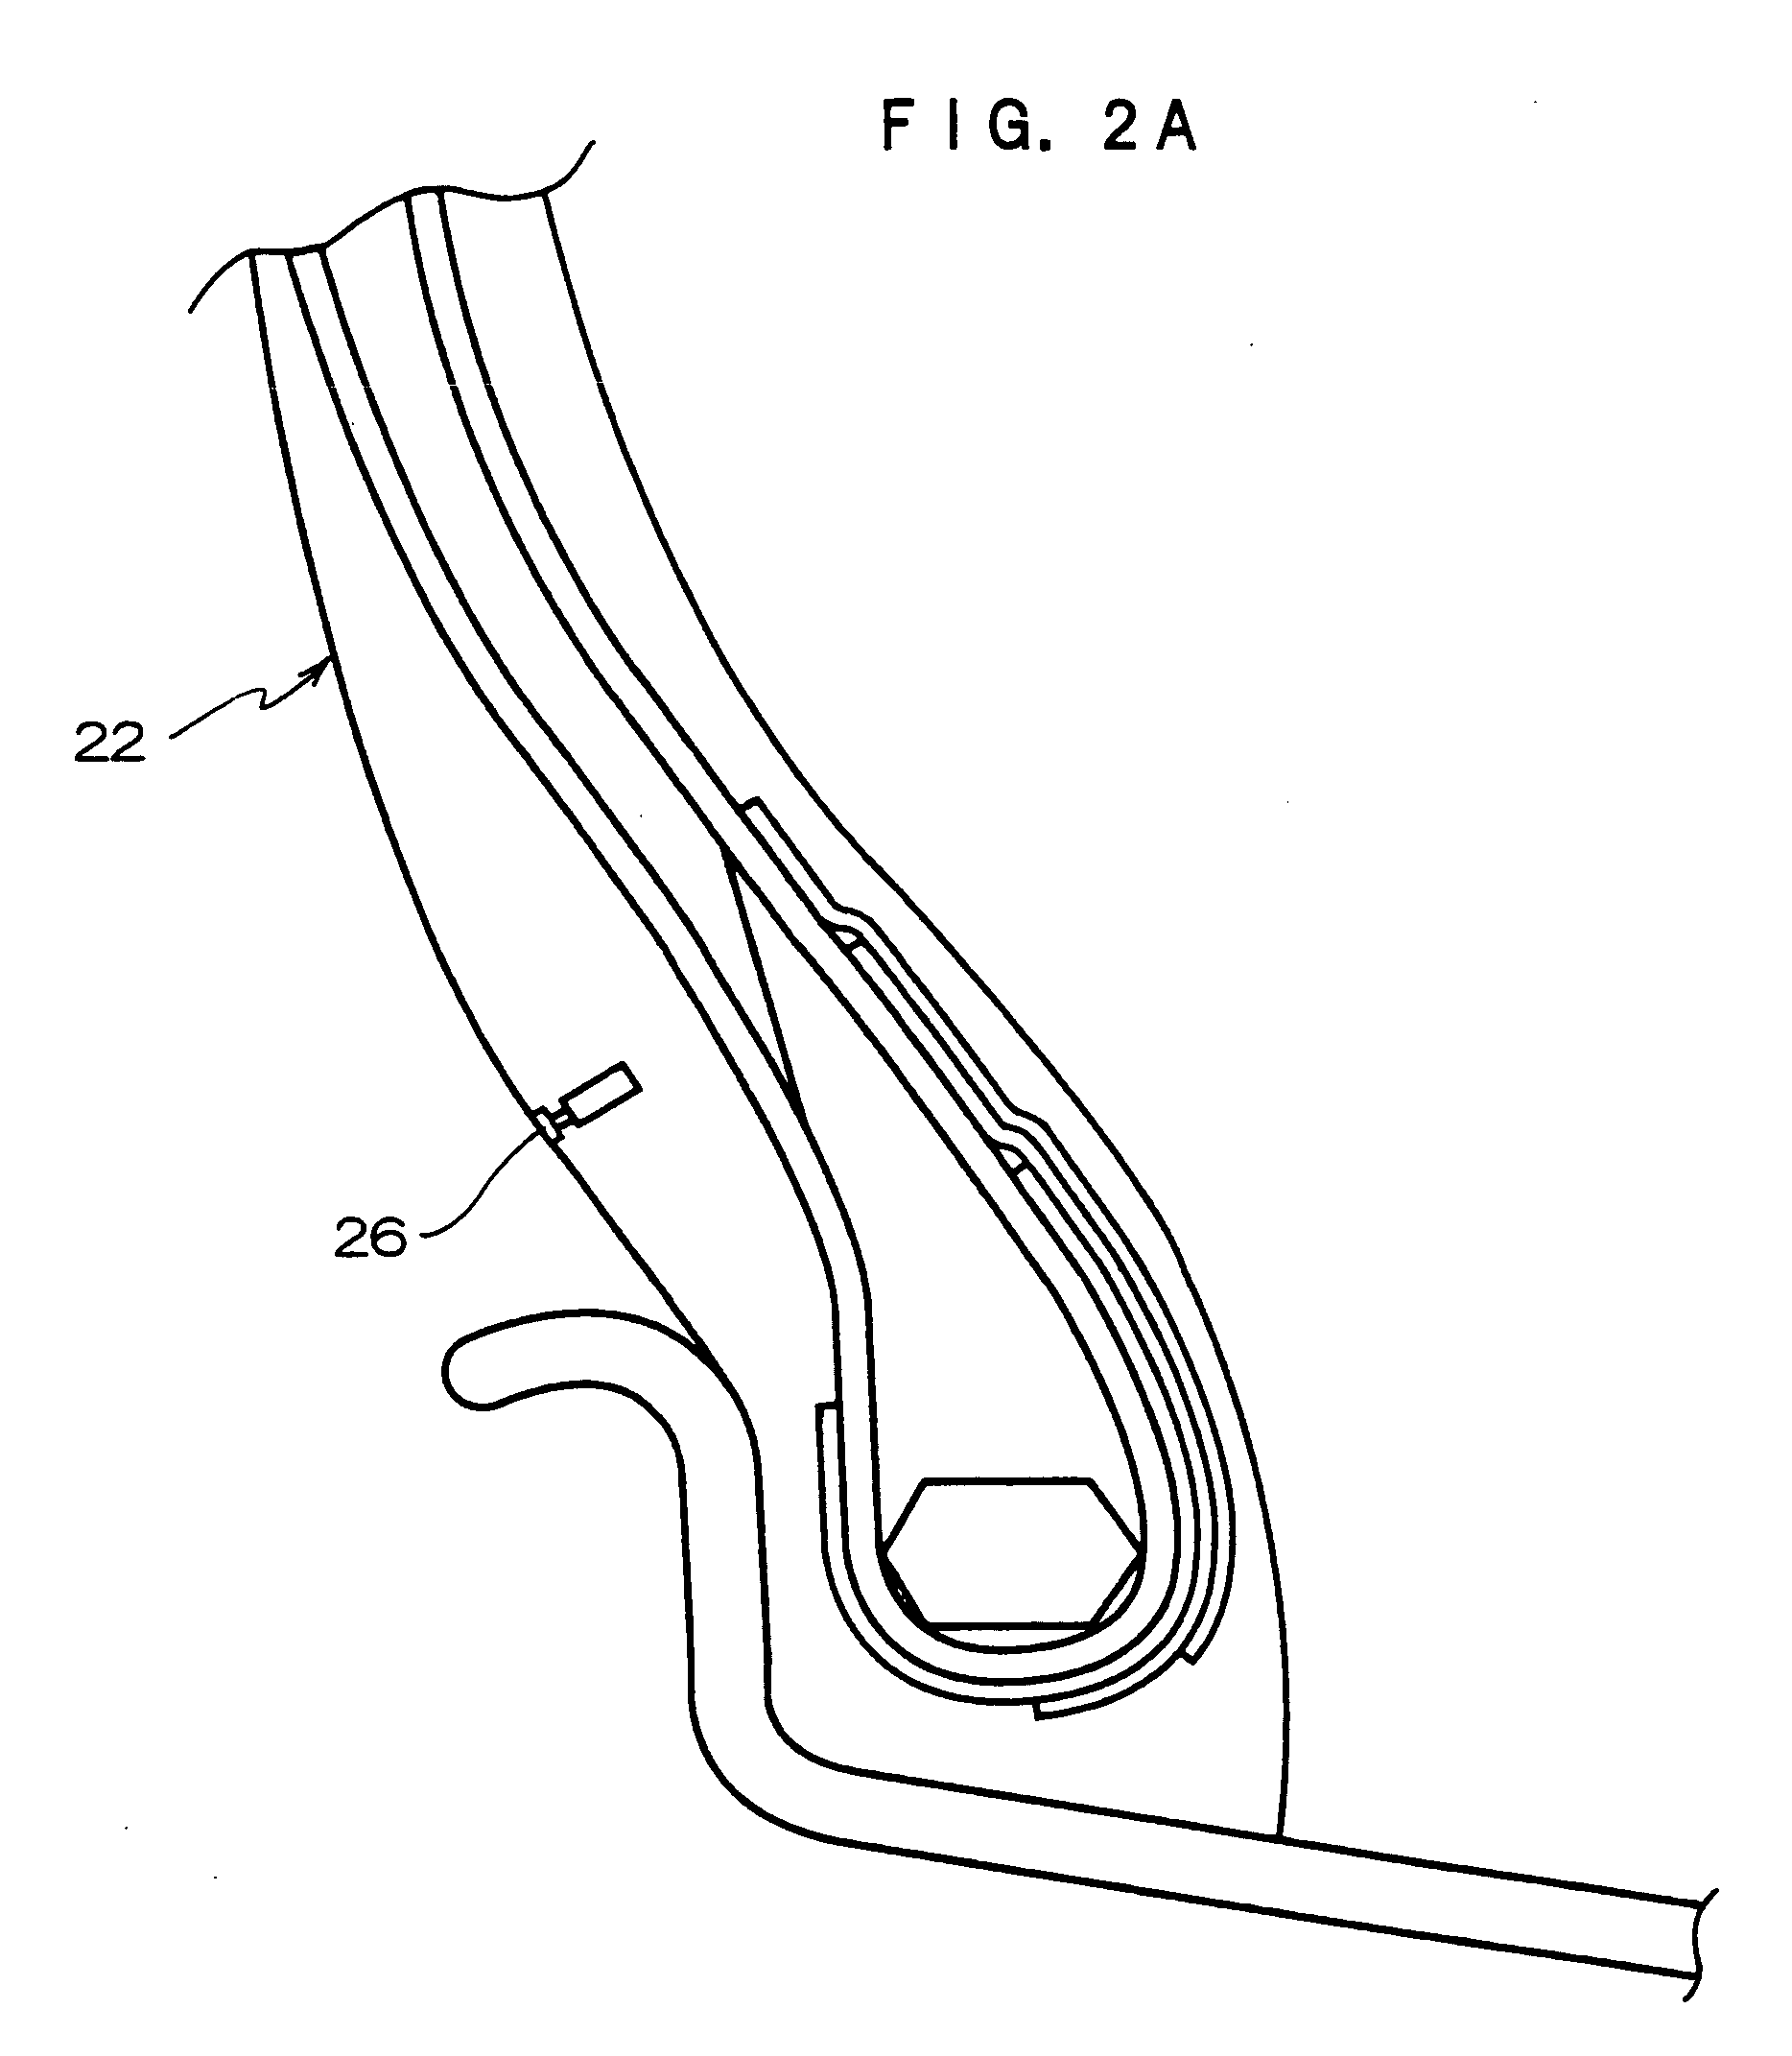 Holder with Wireless Ic Tag and Tire with Wireless Ic Tag